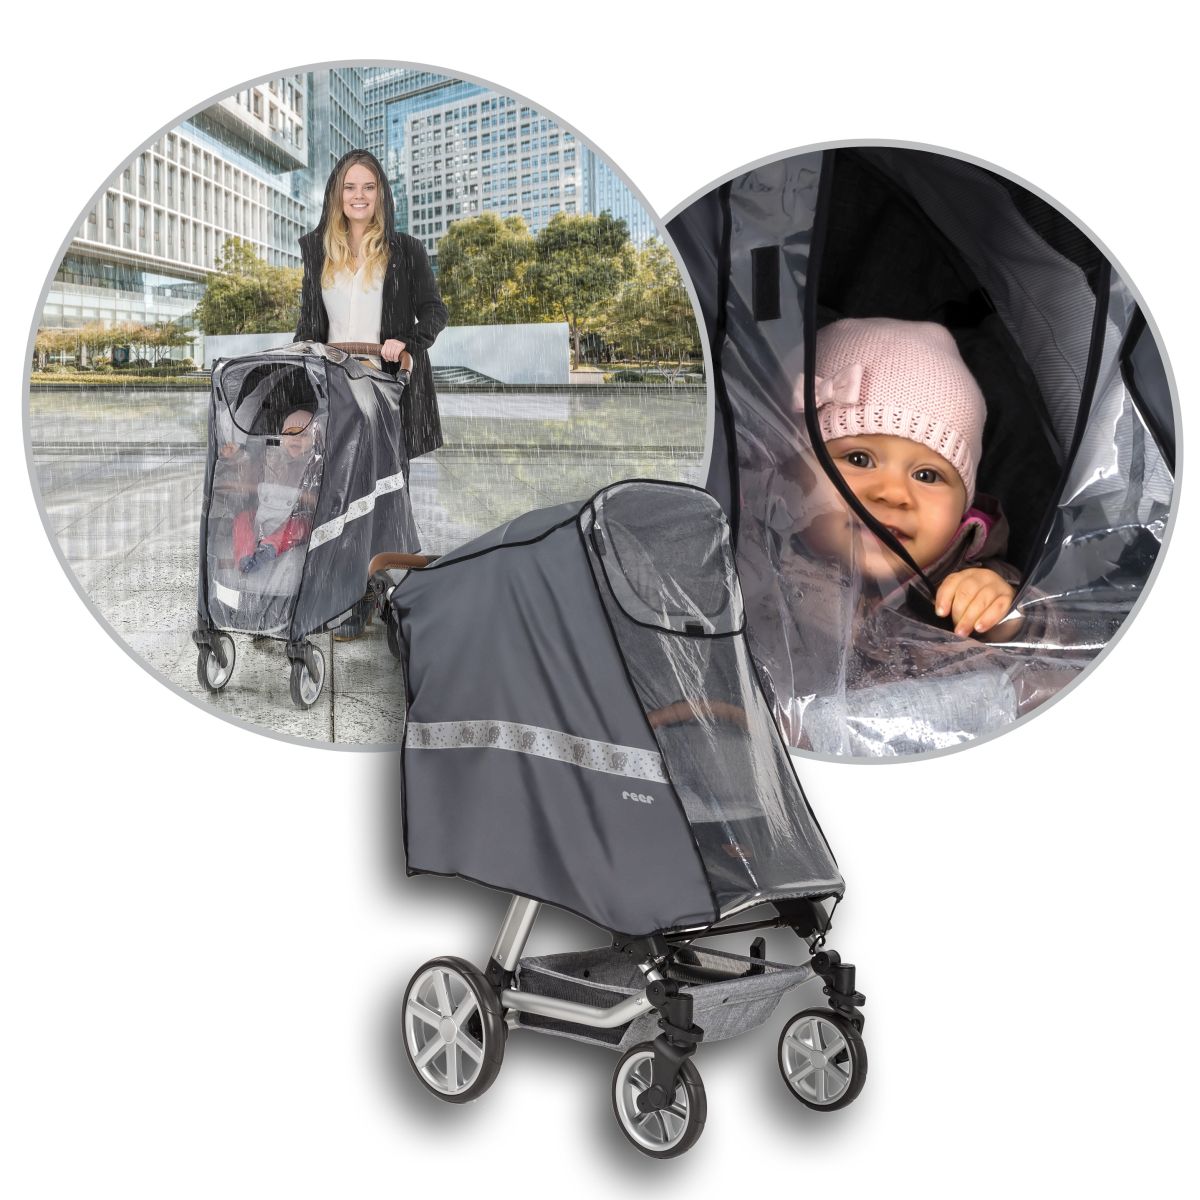 RainSafe Active rain cover for buggies and sports pushchairs